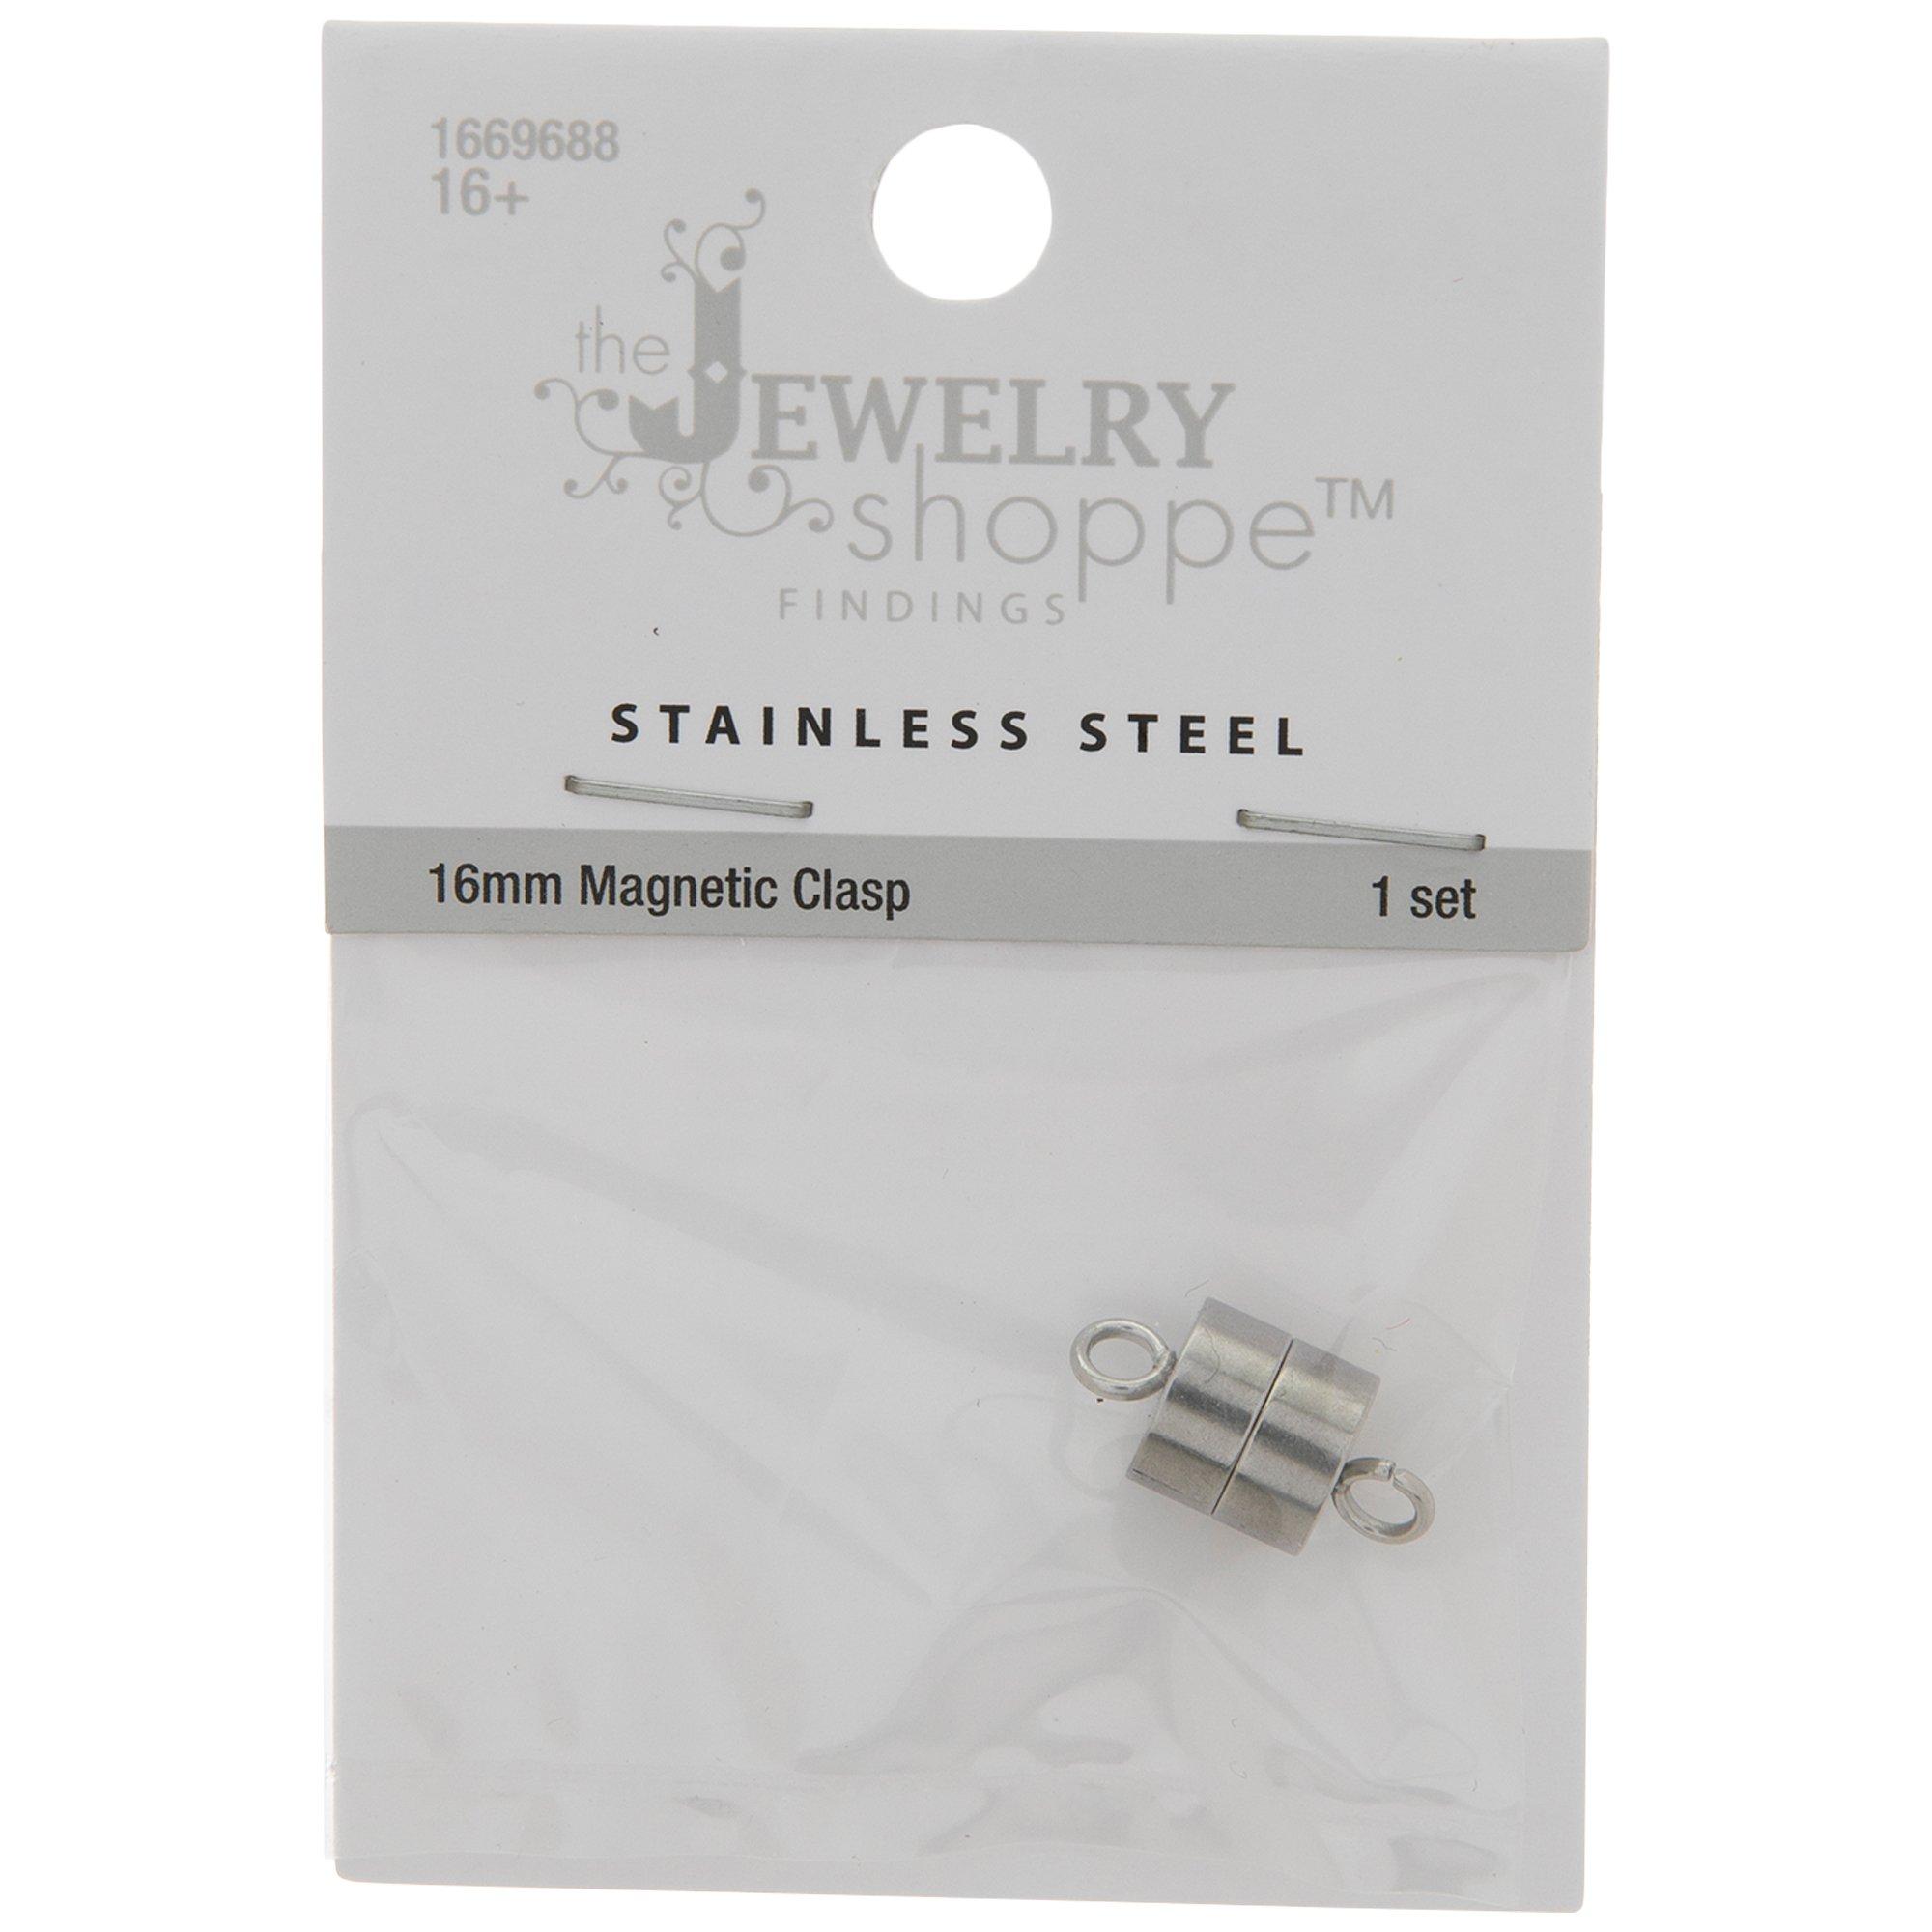 Magnets Used for Making Jewelry Clasps